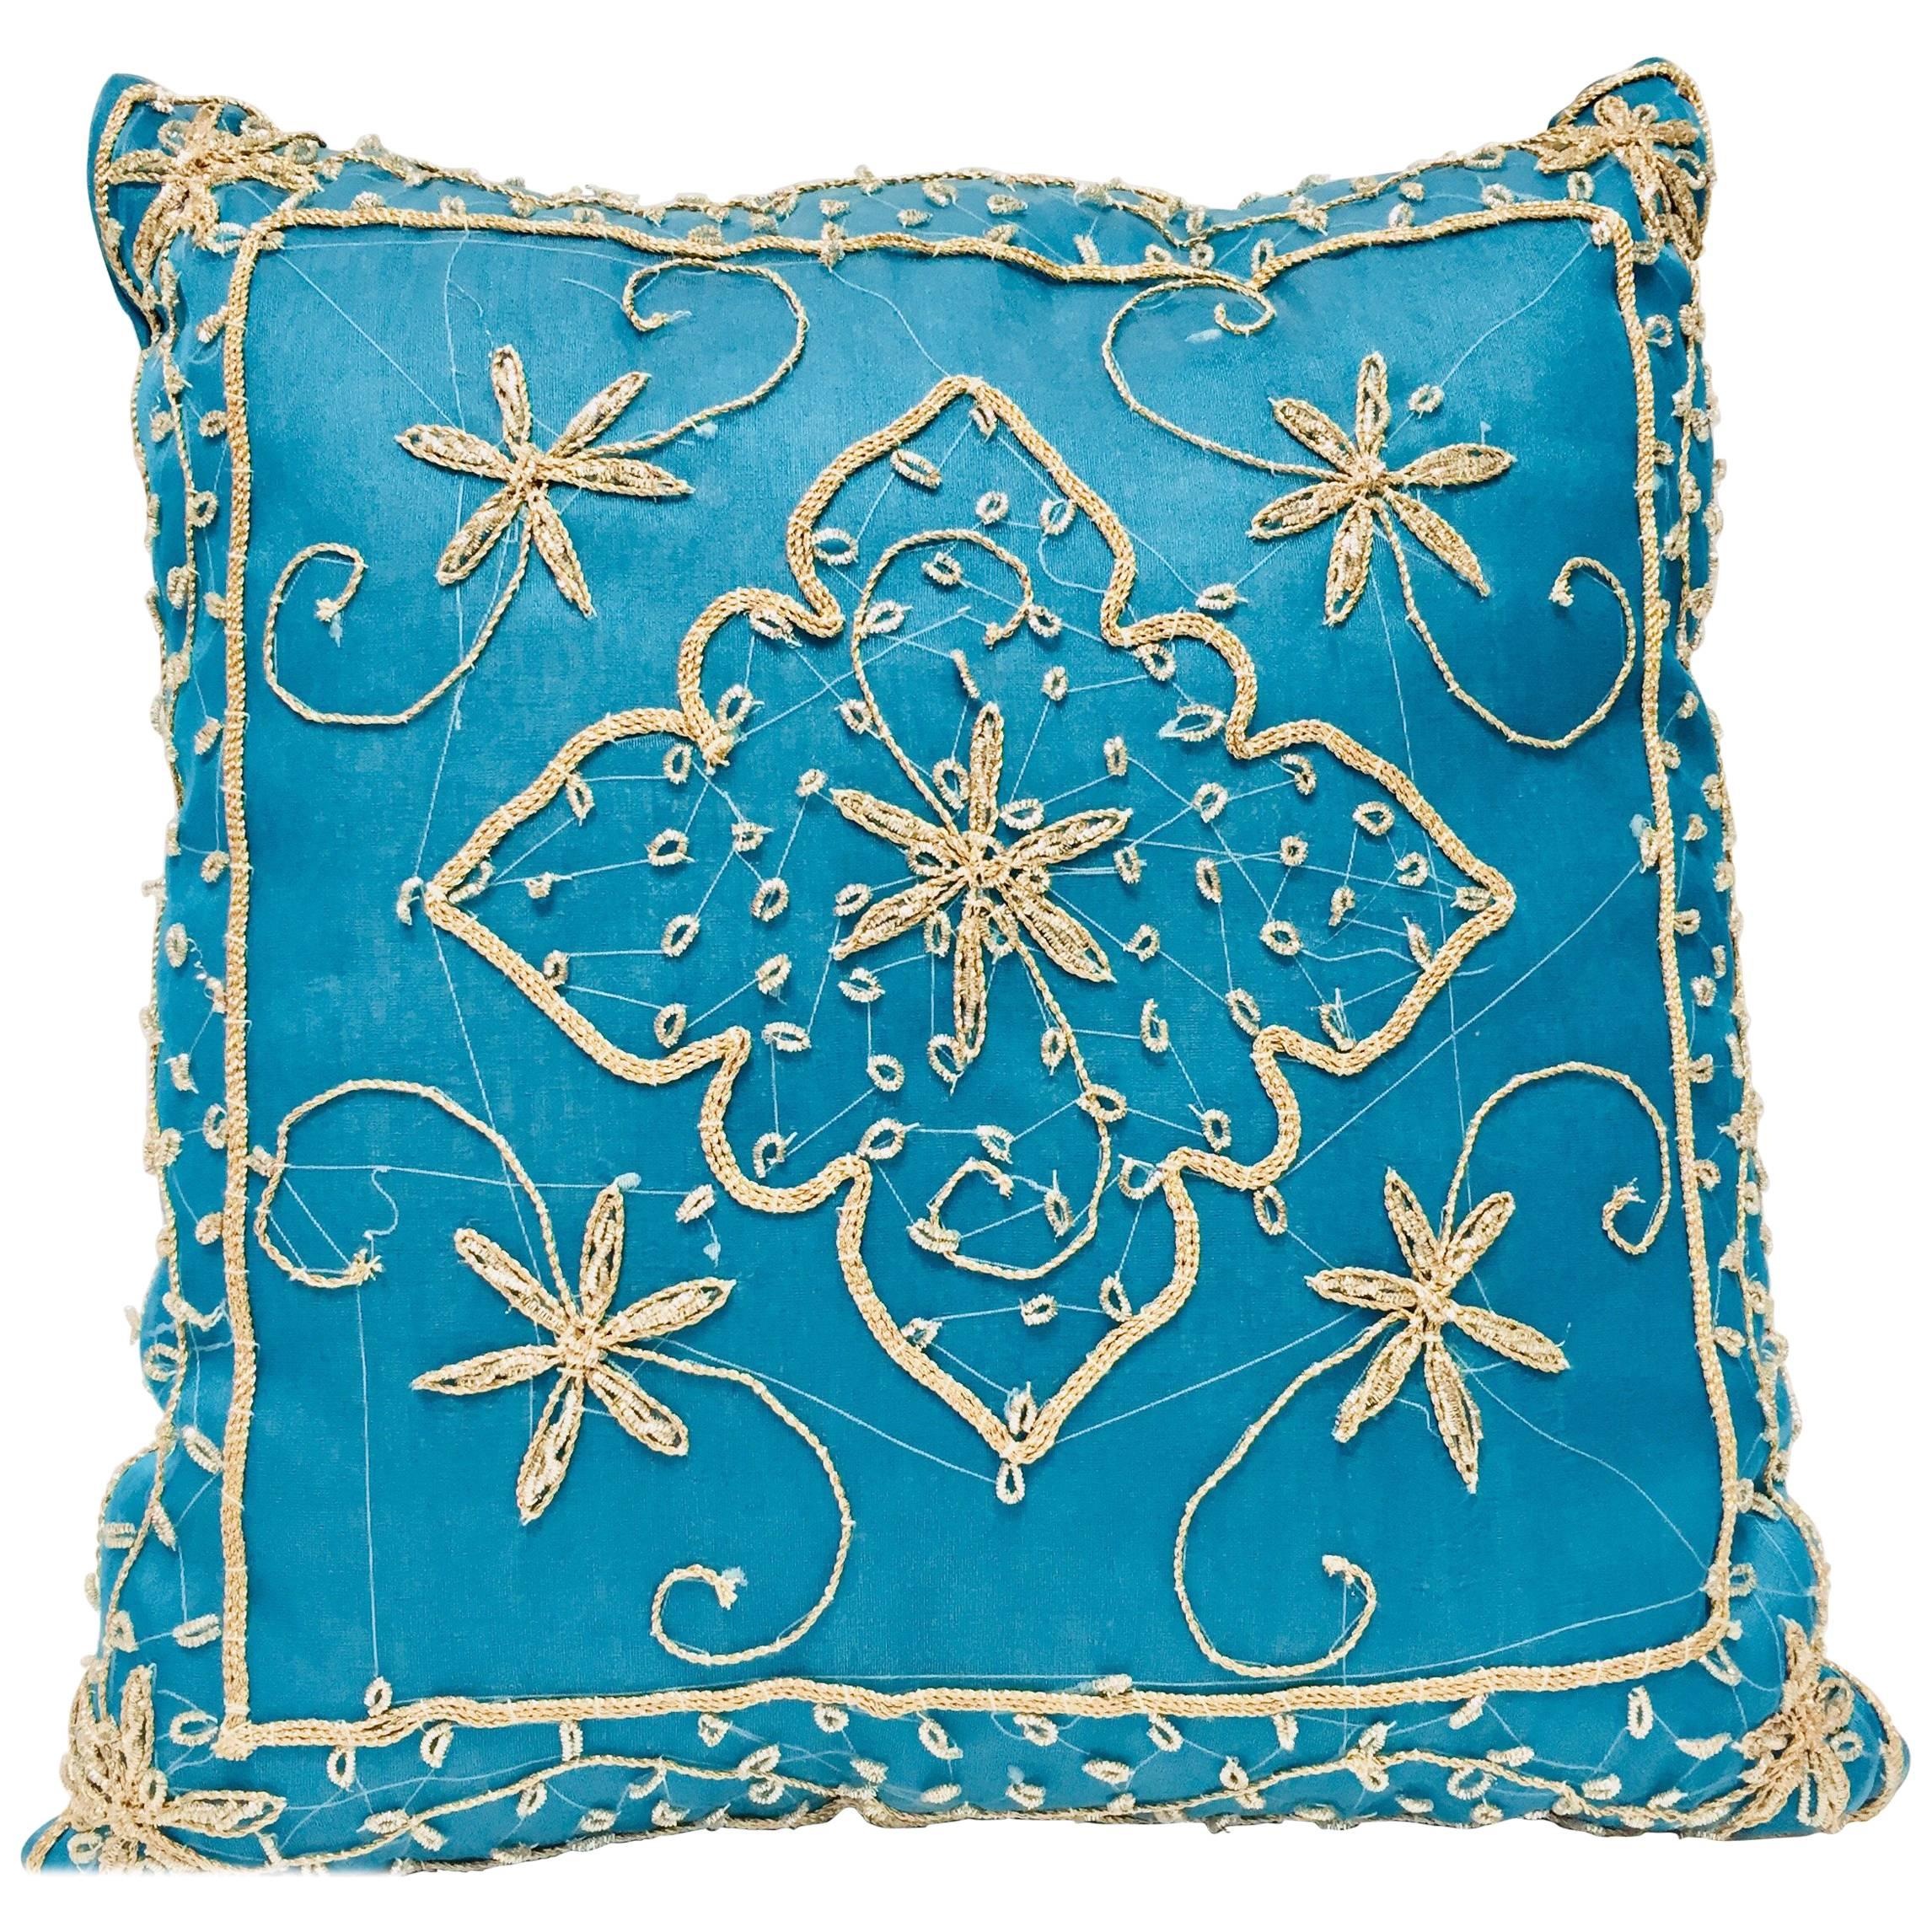 Throw Decorative Turquoise Moorish Pillow Embellished with Sequins and Beads